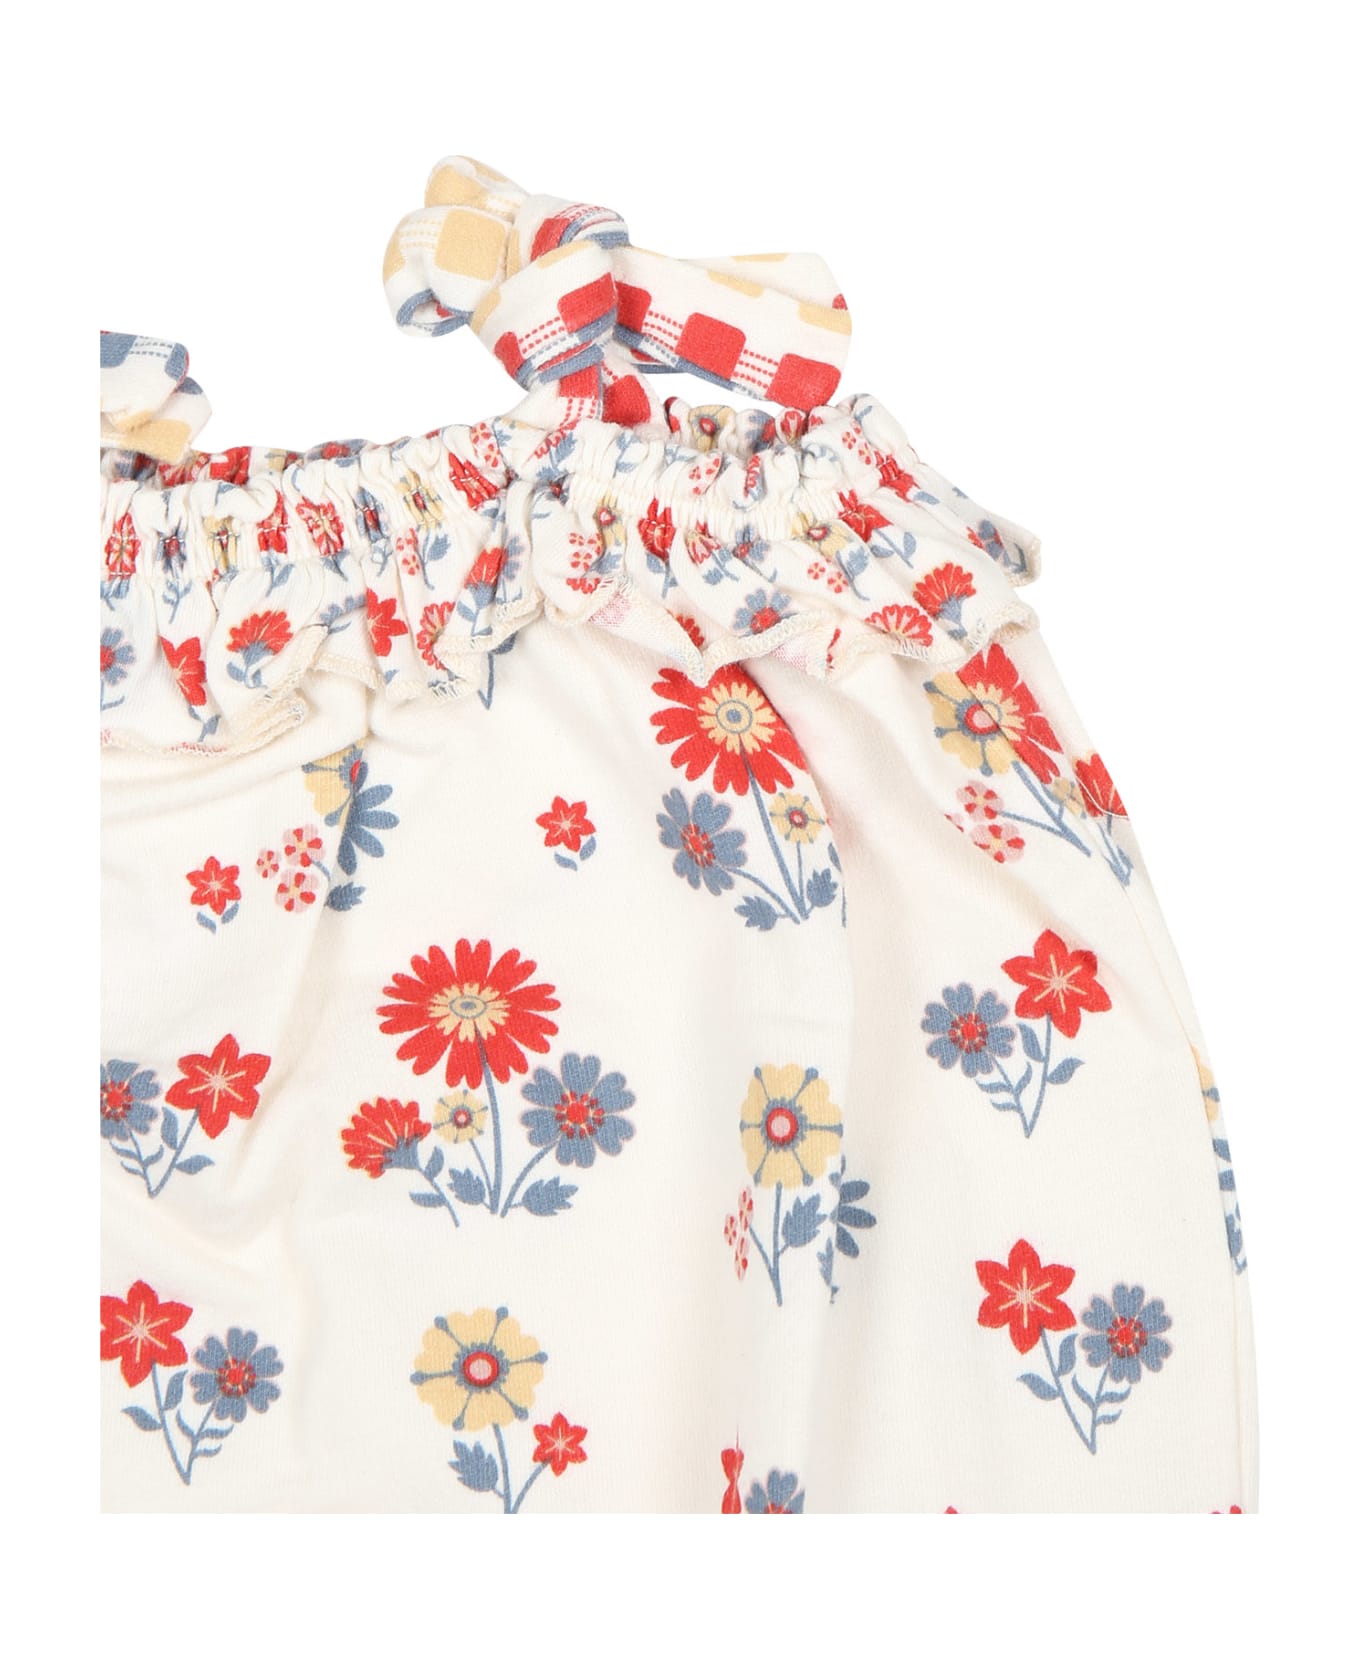 Coco Au Lait Ivory Romper For Baby Girl With Flowers Print - Ivory